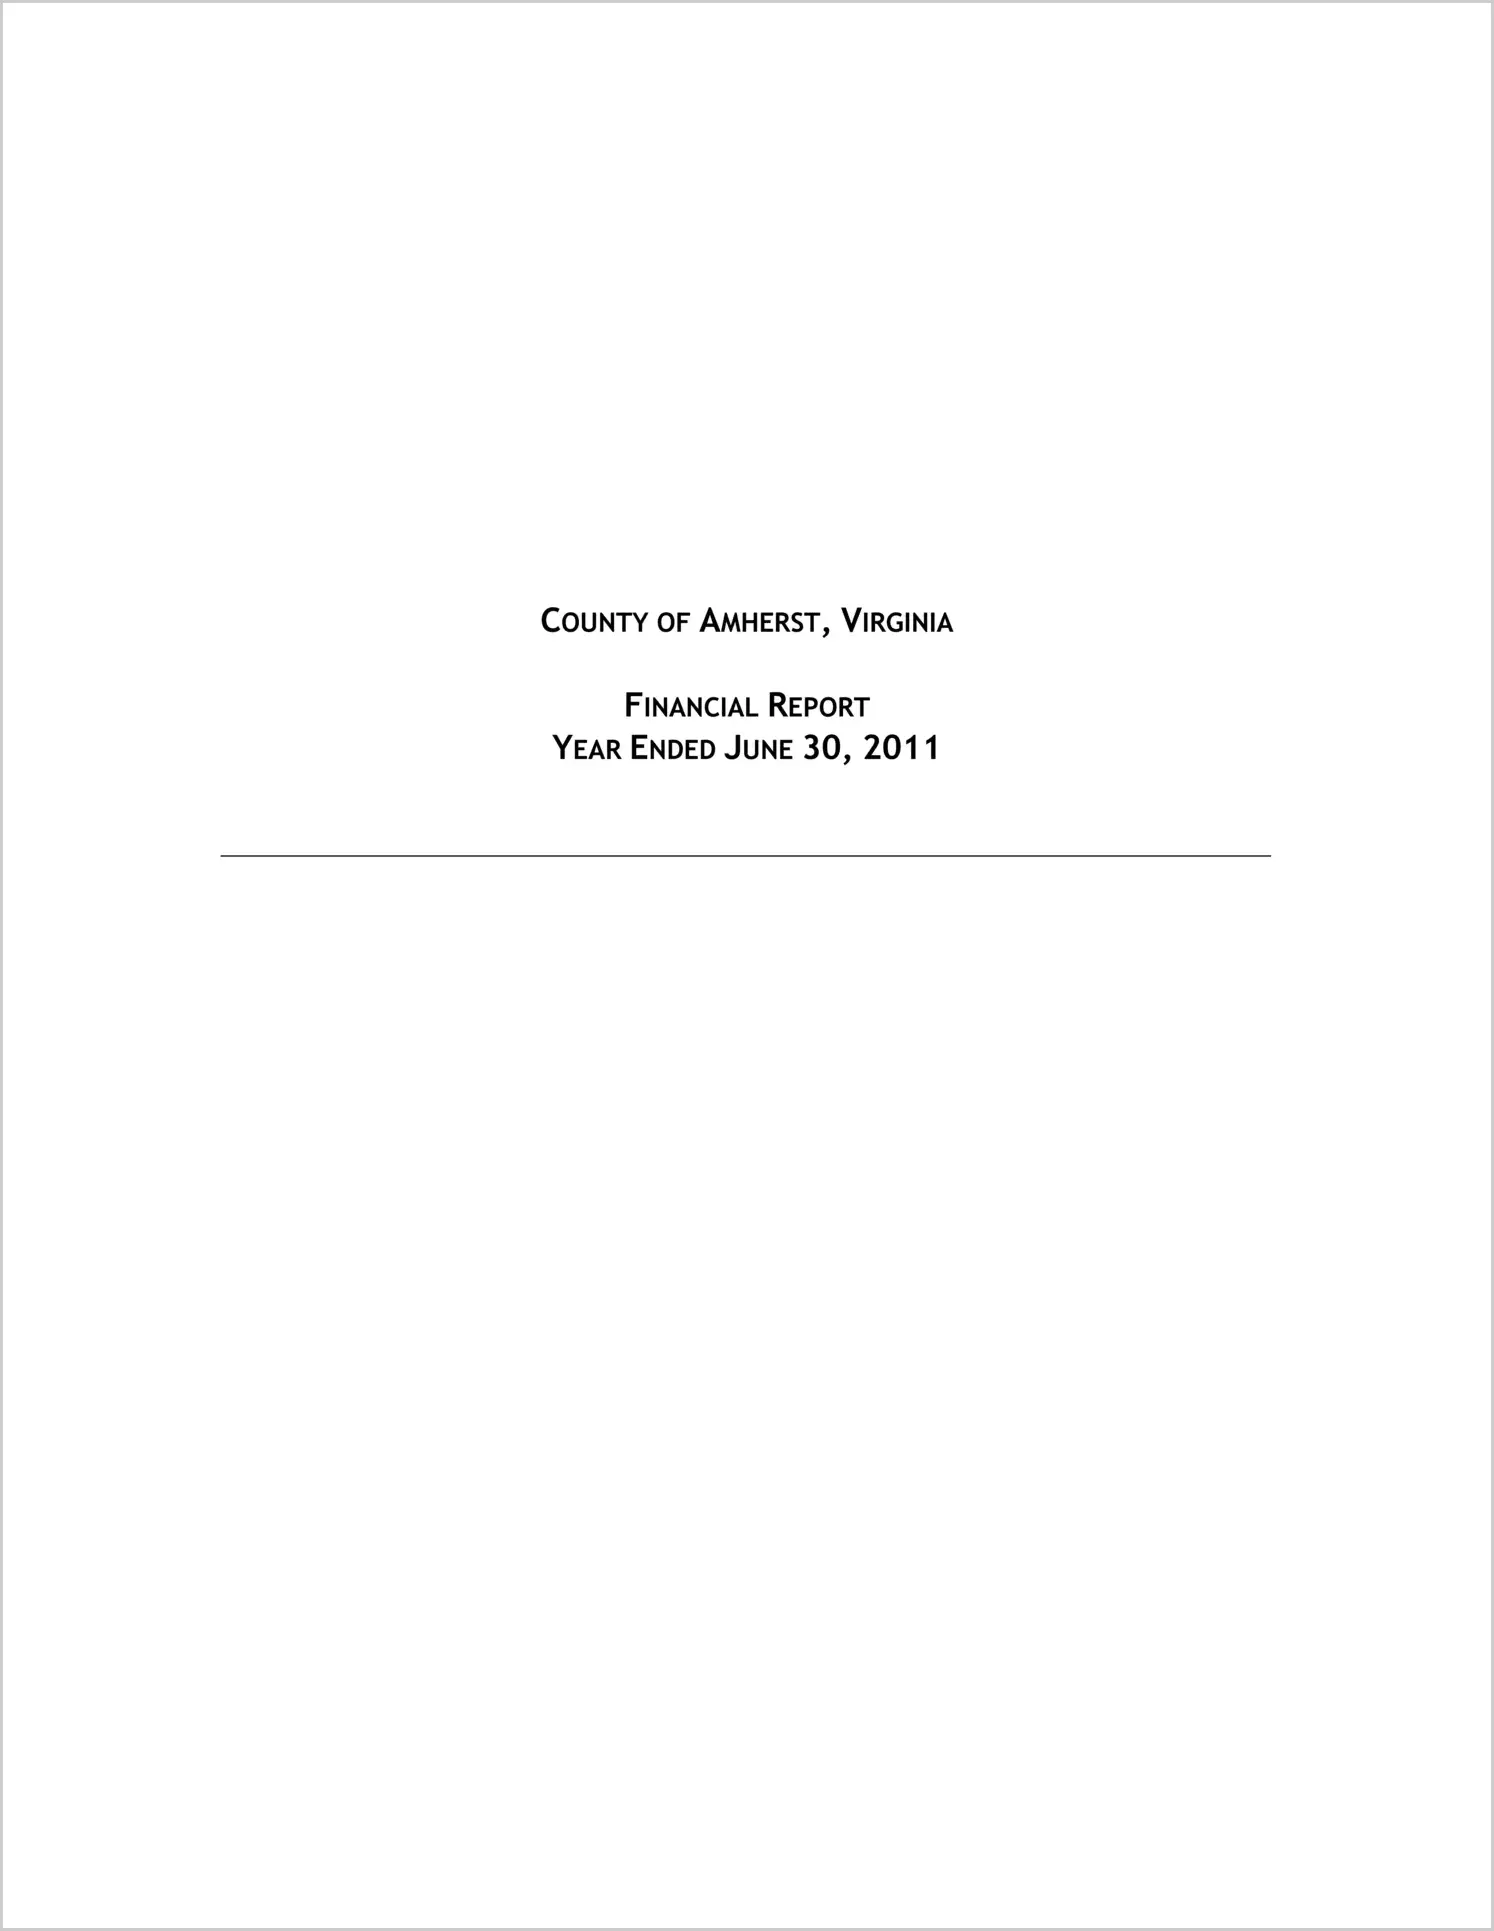 2011 Annual Financial Report for County of Amherst